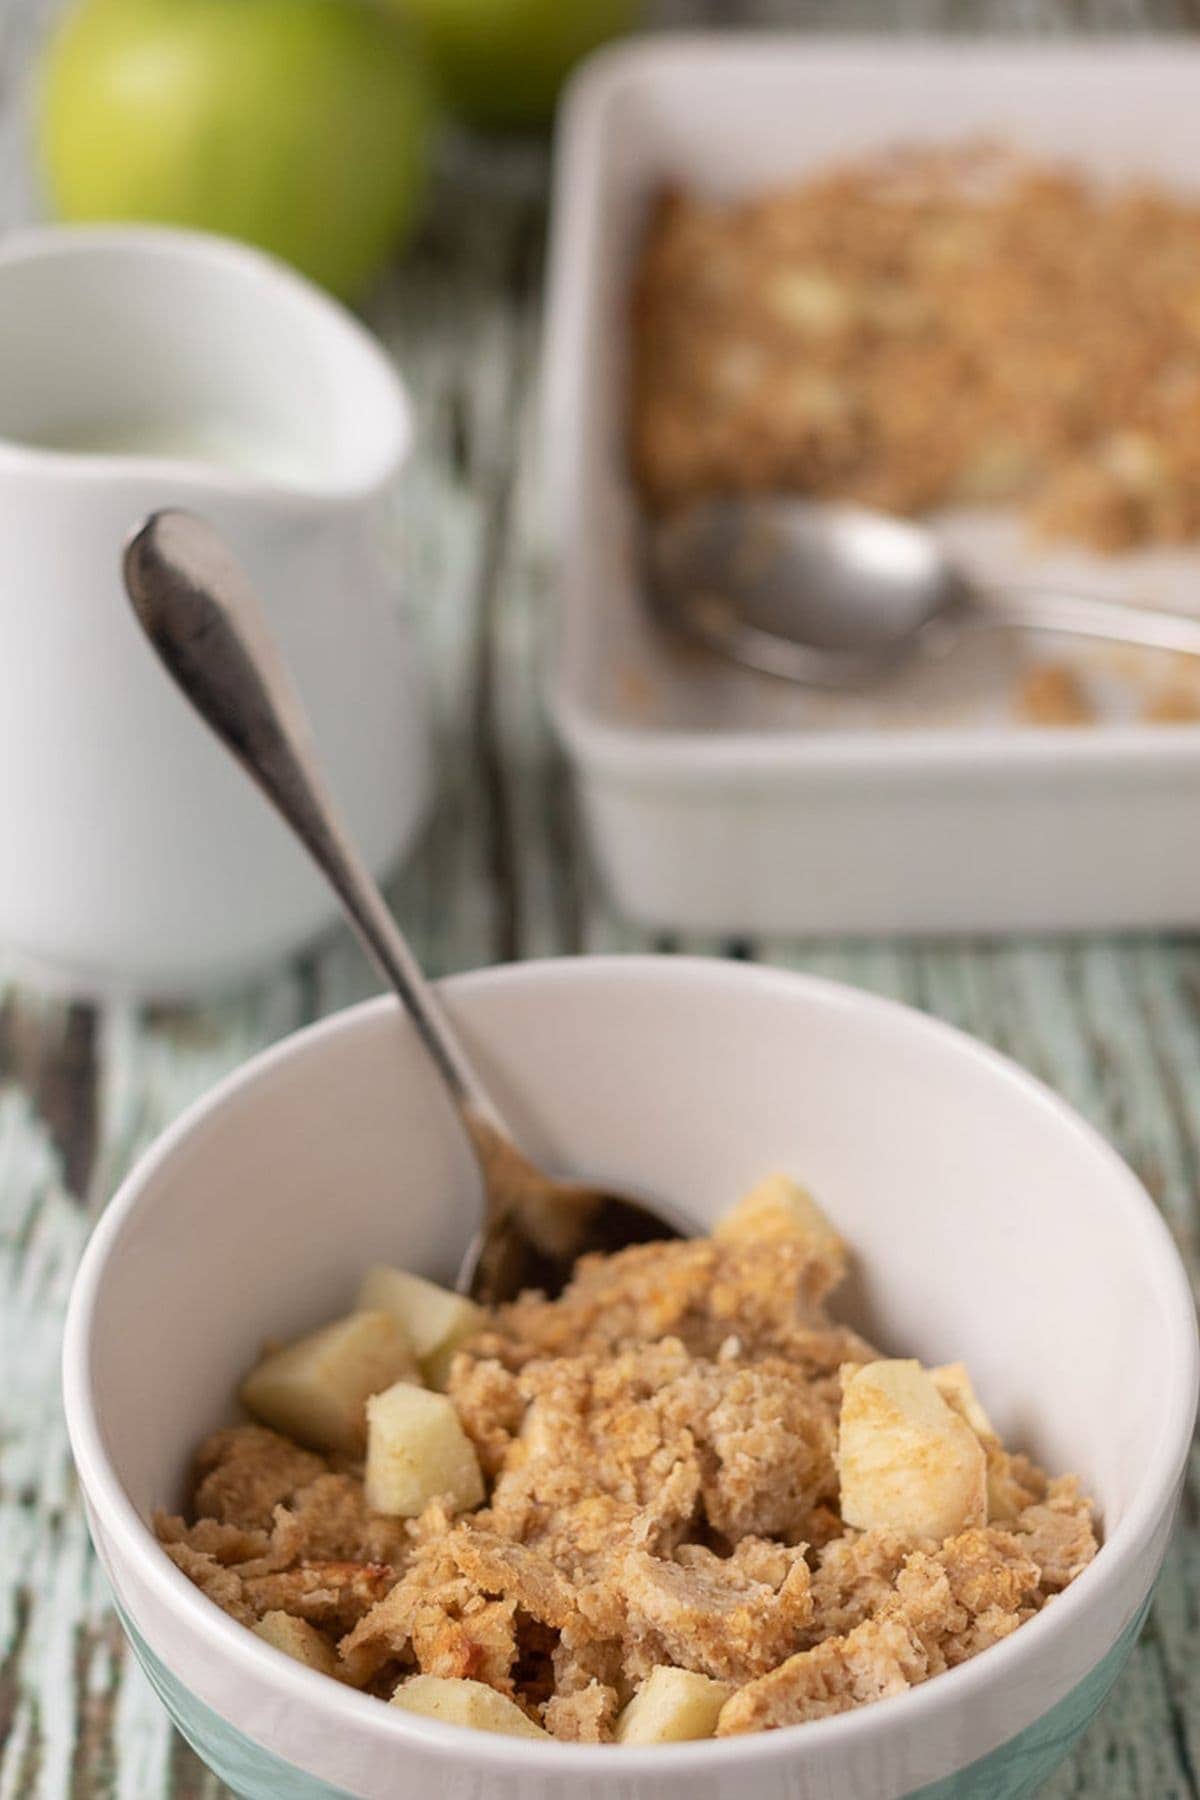 Bowl of cooked baked apple and cinnamon oats served with spoon in. Rest of the serving dish and a jug of milk and an apple in the background.